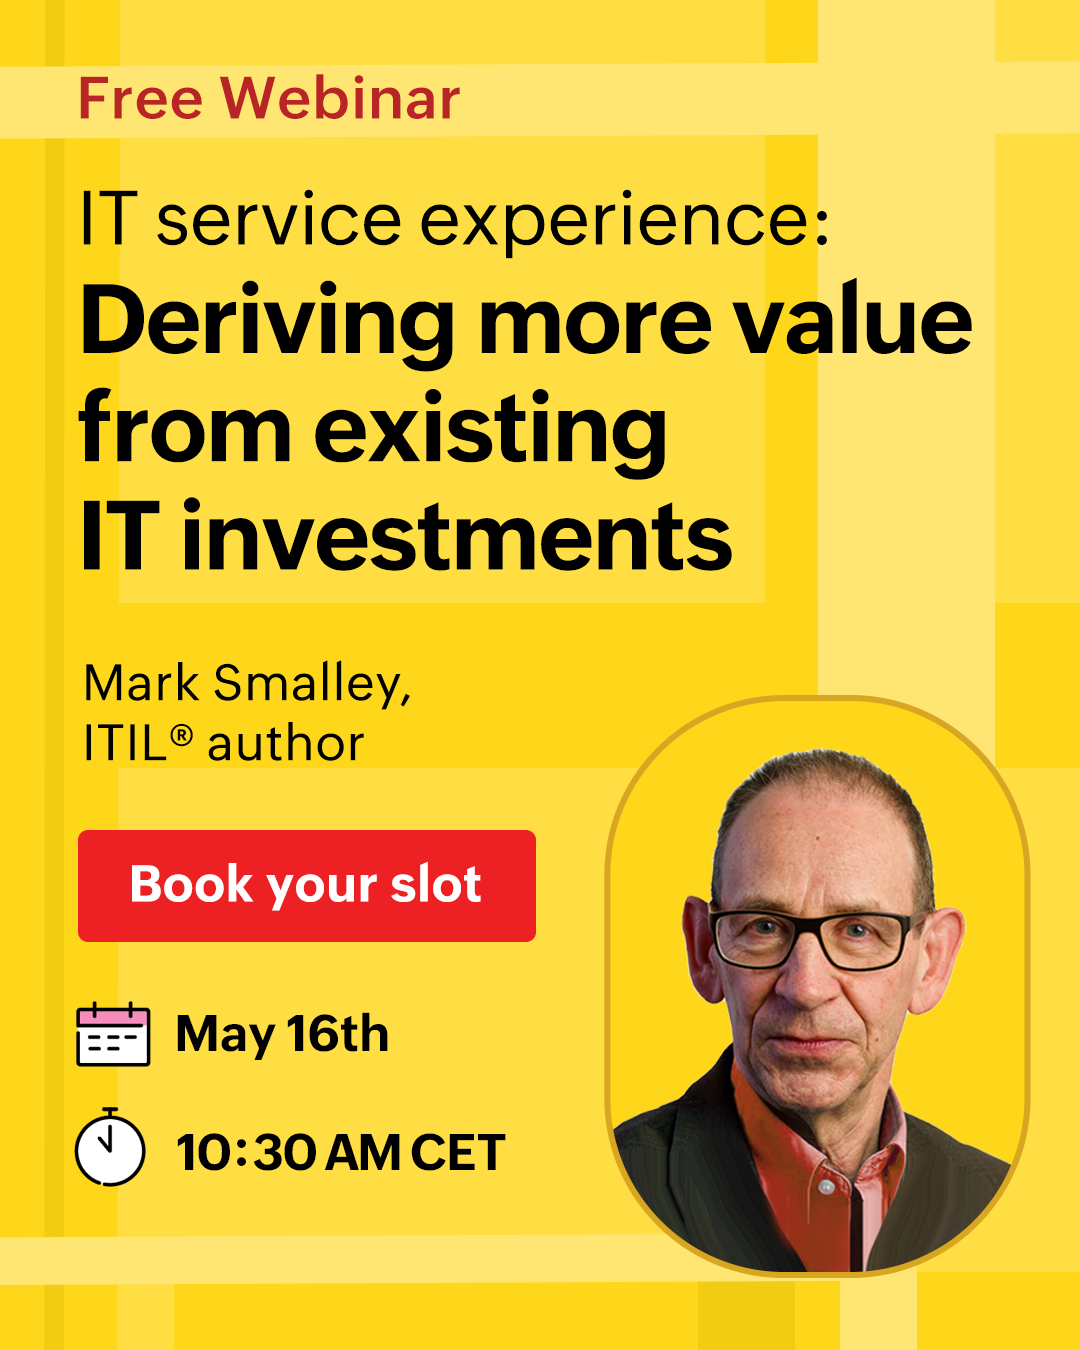 [Free webinar] Deriving more value from existing IT investments